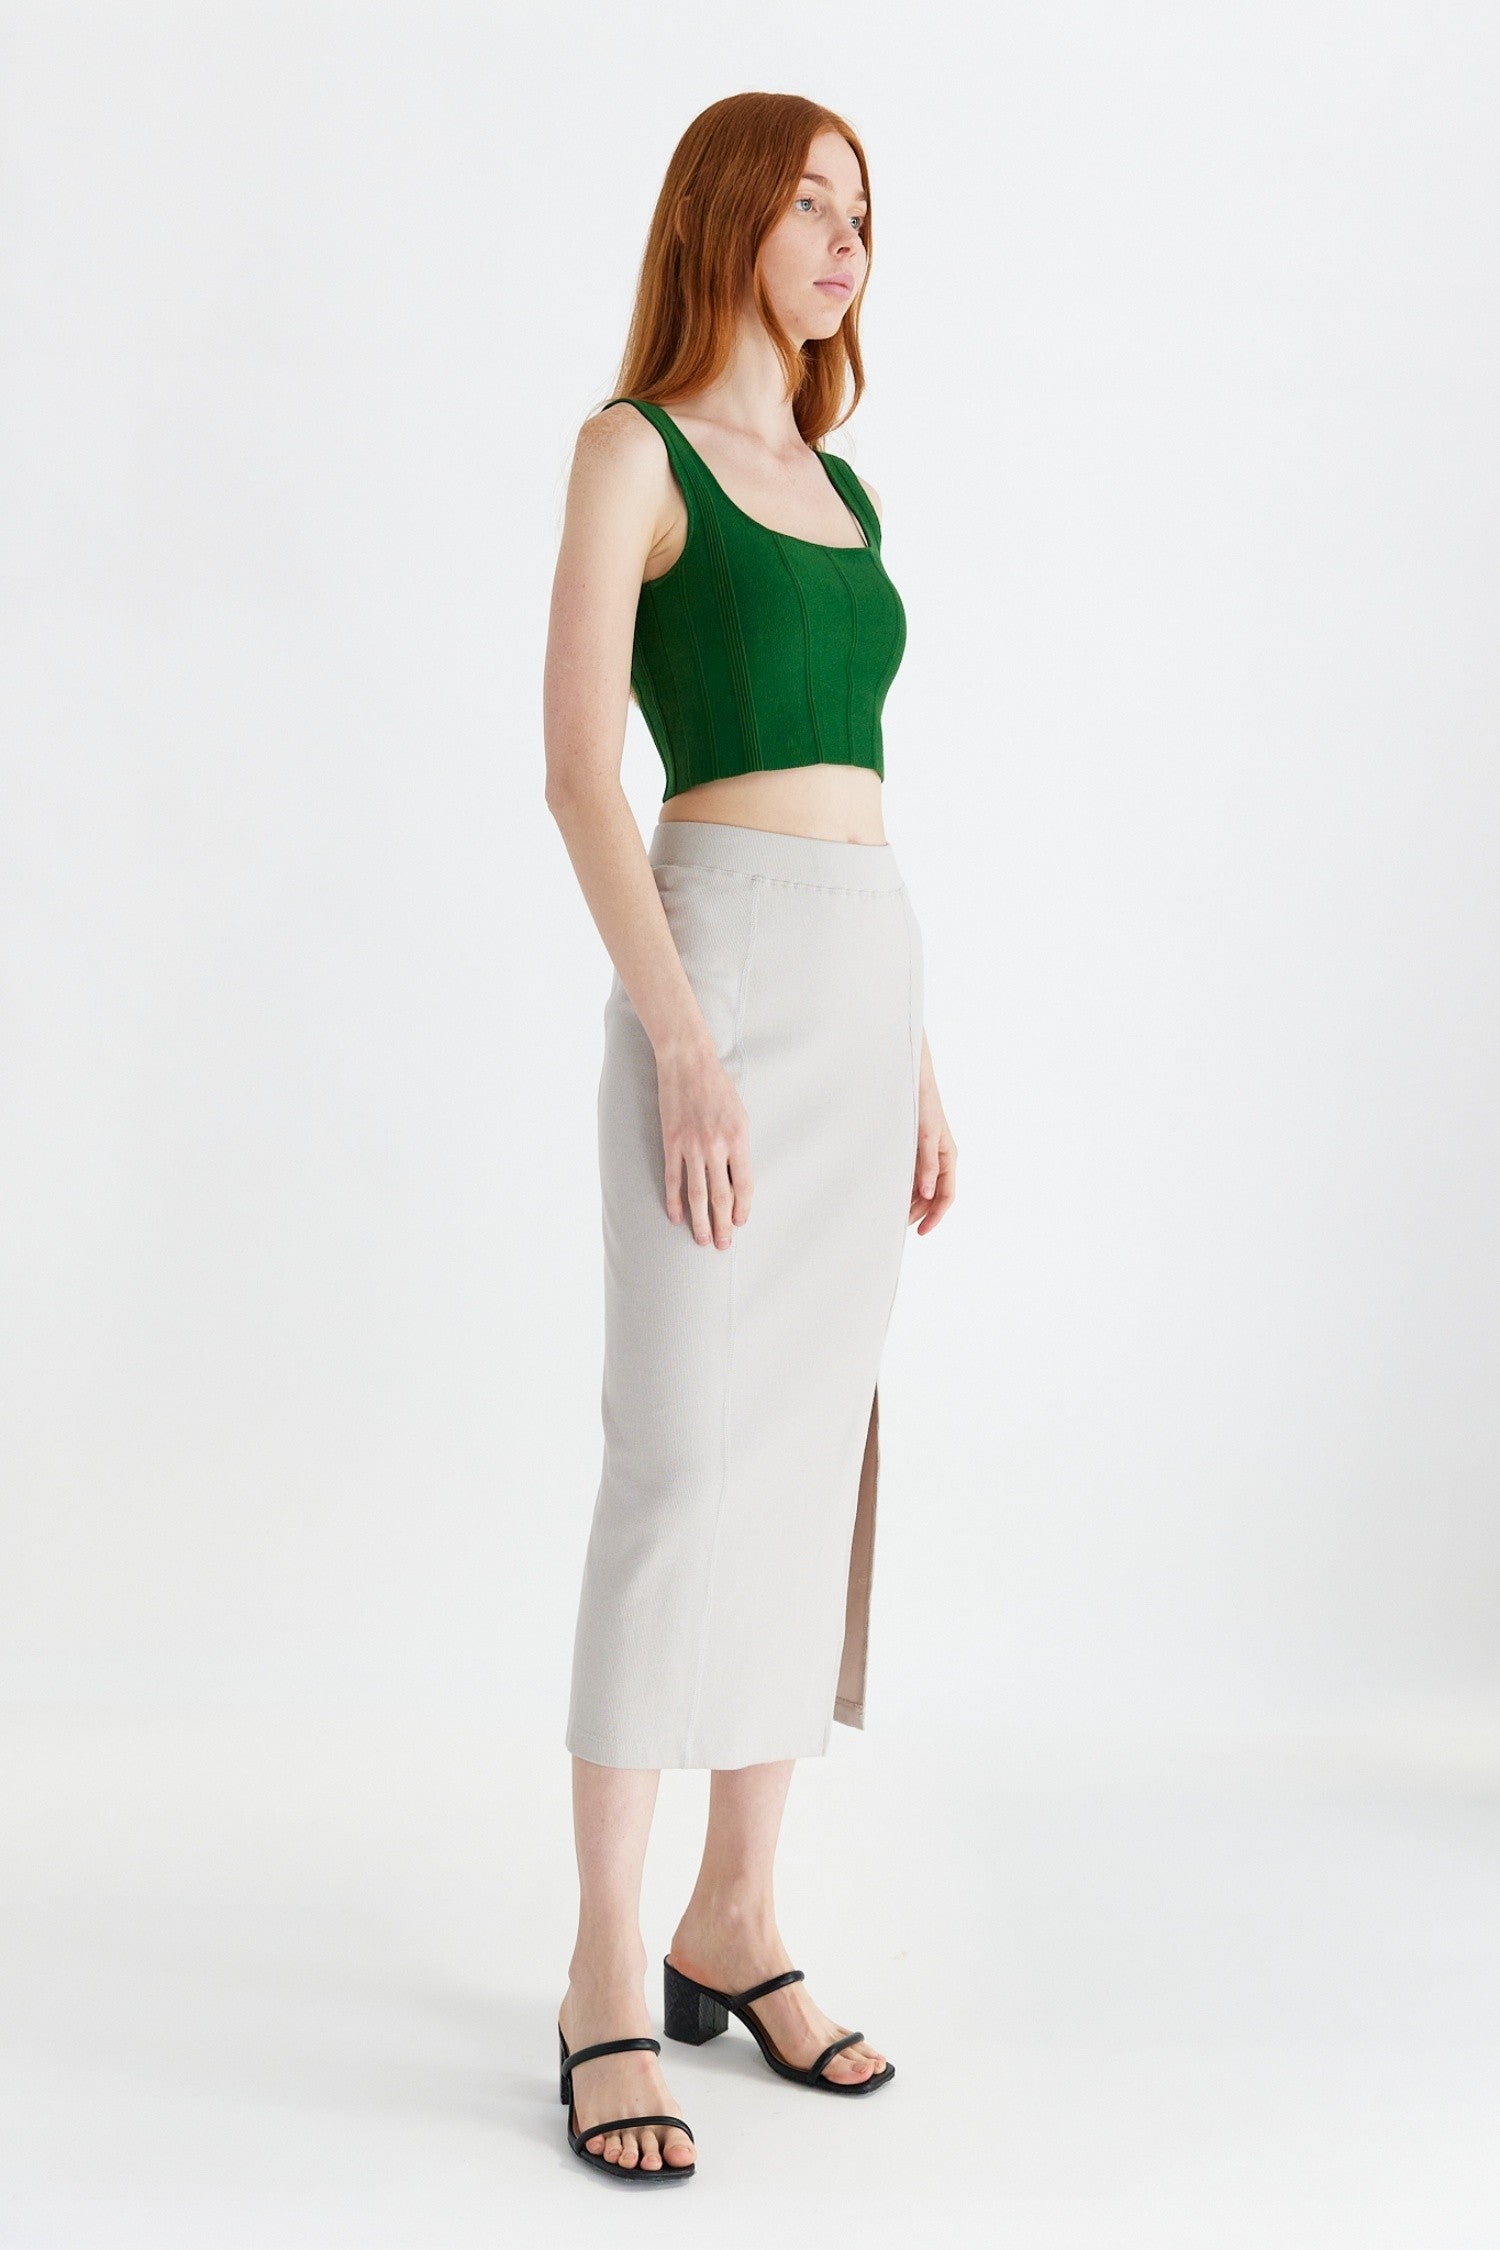 Mod Ref - The Millie Top | Green